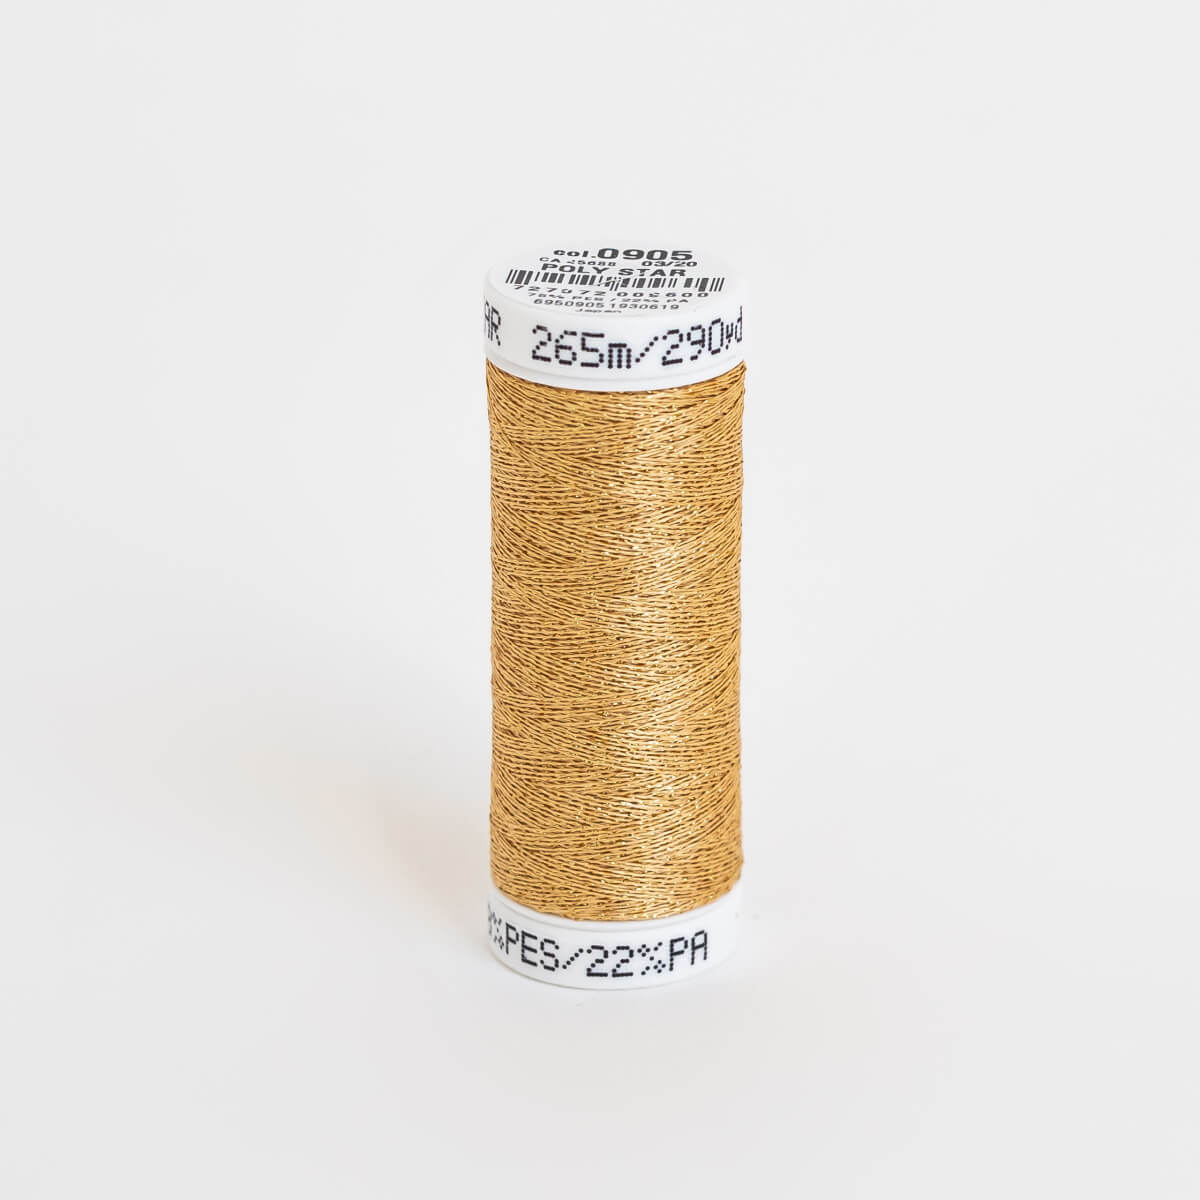 SULKY POLY SPARKLE (STAR) 30, 265m/290yds Snap Spools - Colour 0905 Gold with Gold Sparkle